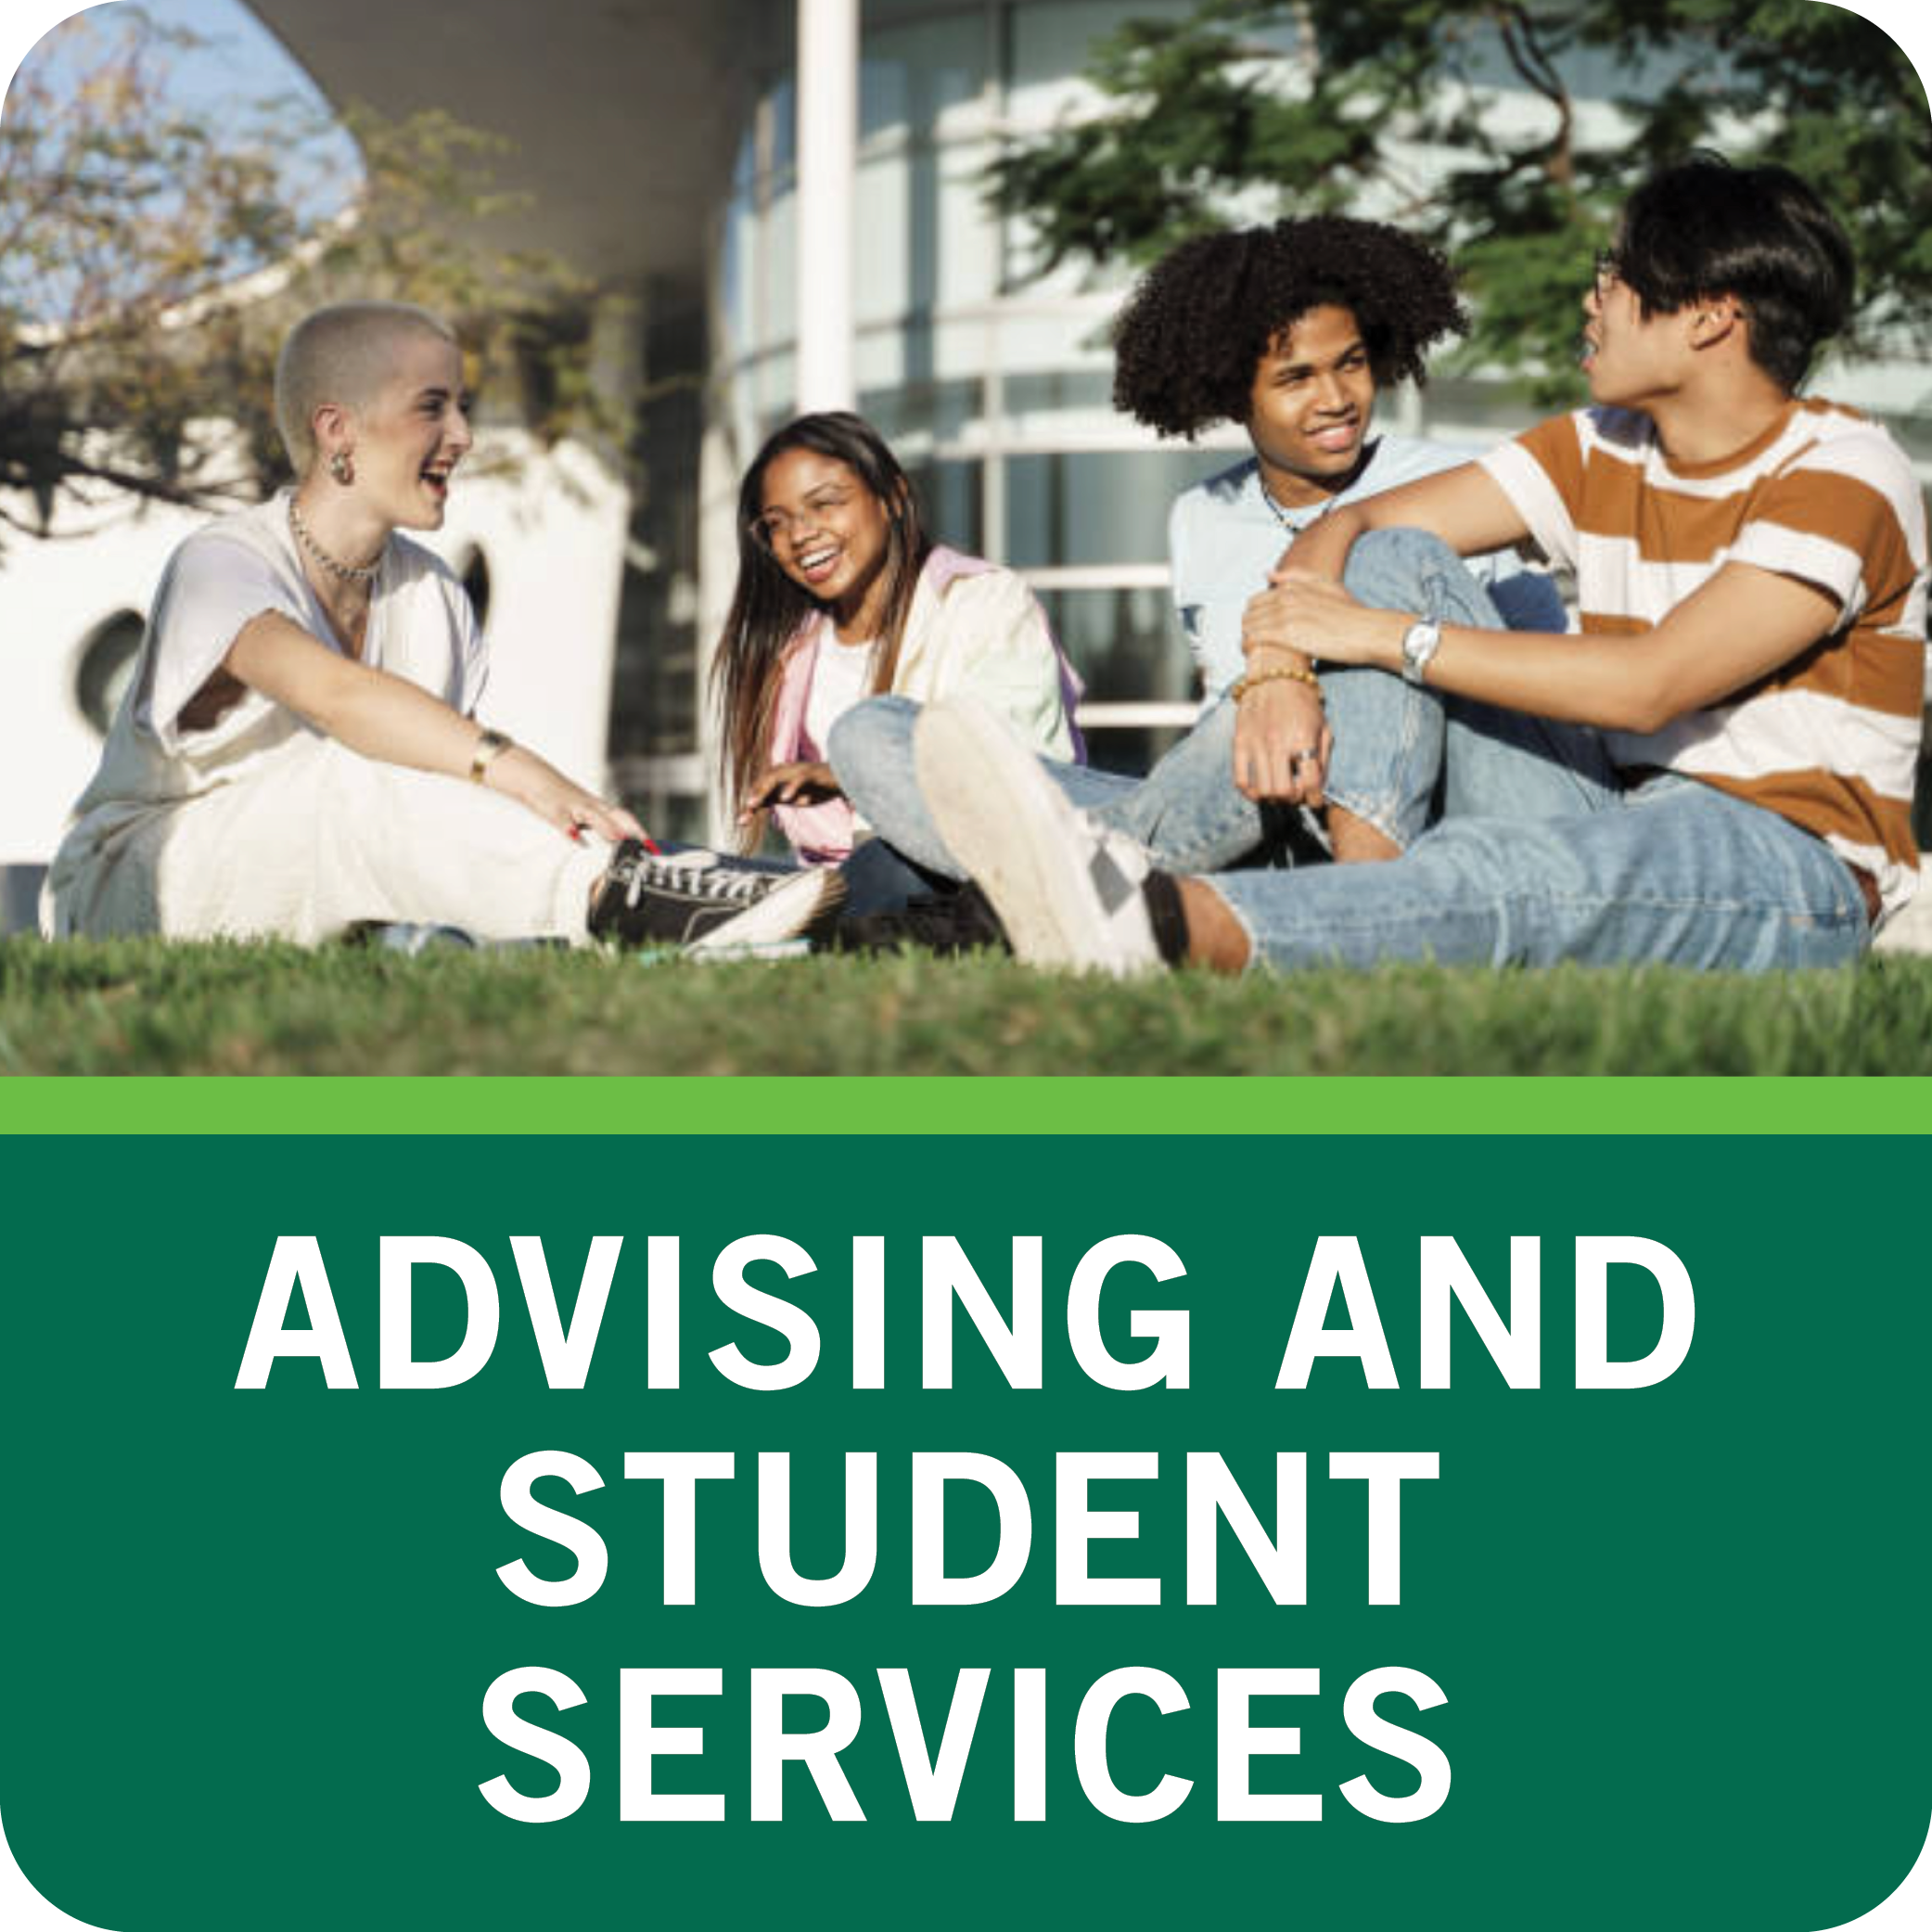 Advising and Student Services